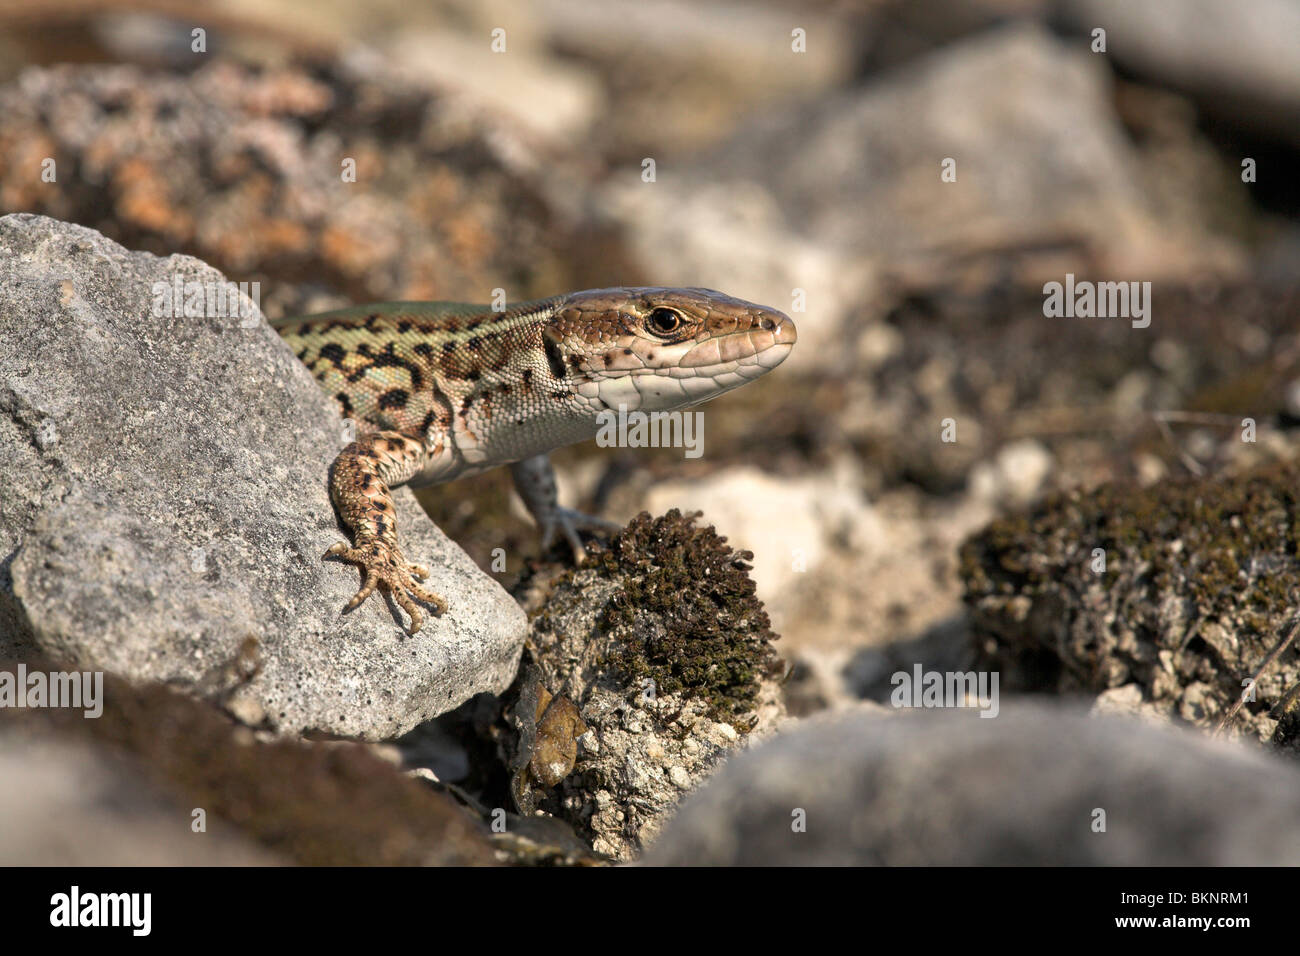 portrait of an Italian Wall lizard looking from behind a rock Stock Photo